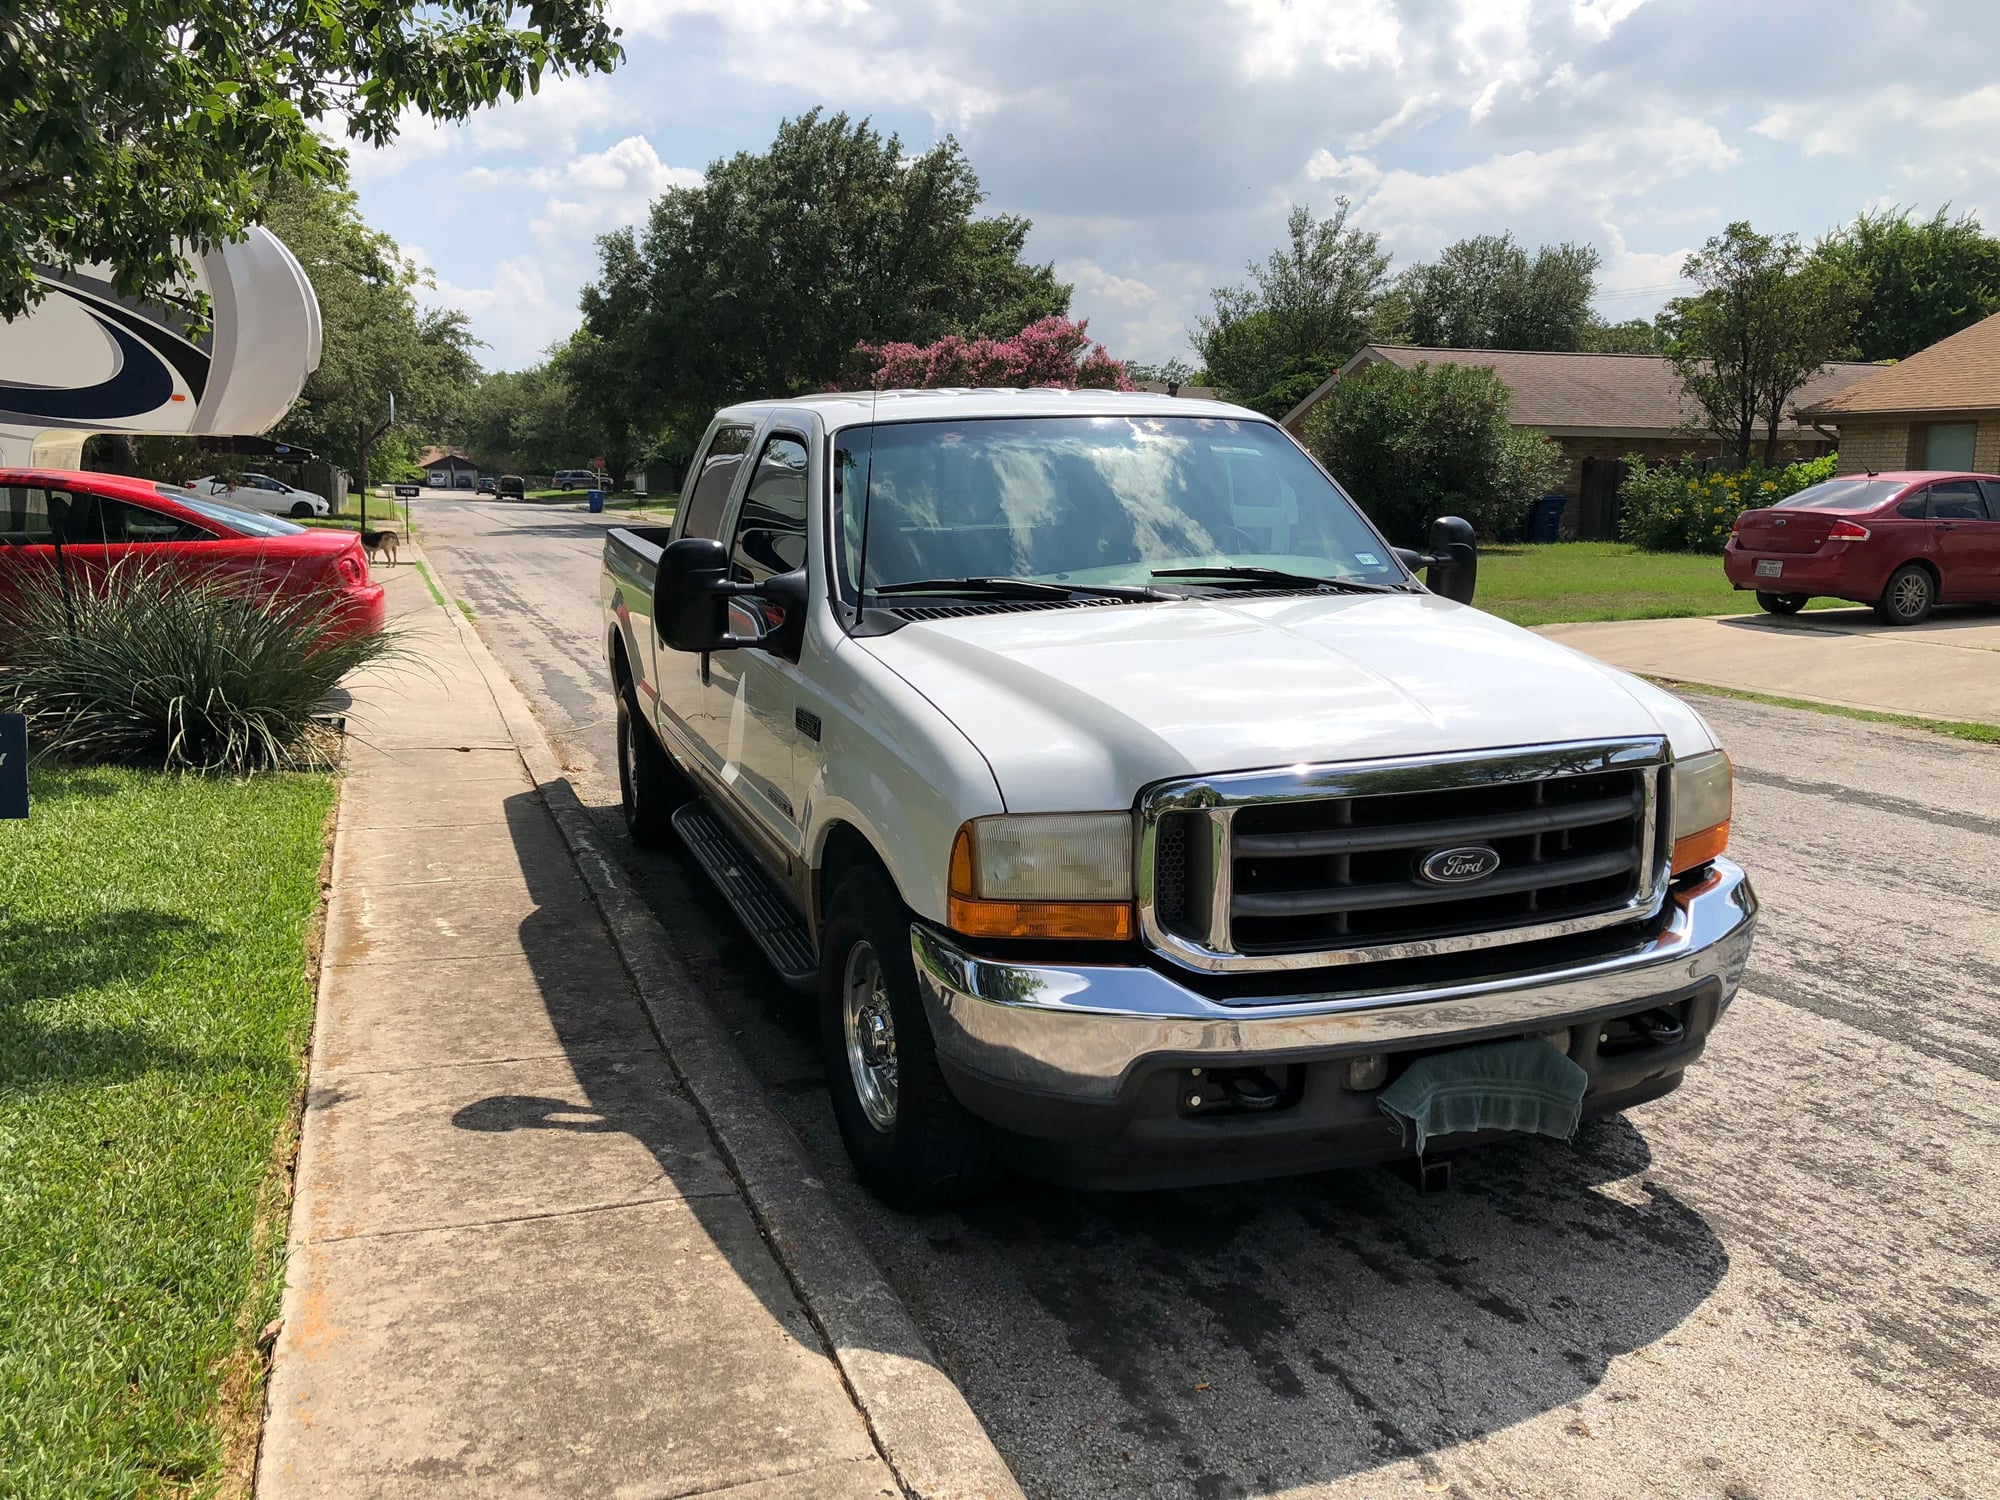 2001 Ford F-250 Super Duty - Immaculate 01 Crewcab F250 - Used - VIN 1FTNW20F51EA86656 - 230,000 Miles - 8 cyl - 2WD - Automatic - Truck - White - San Antonio, TX 78247, United States